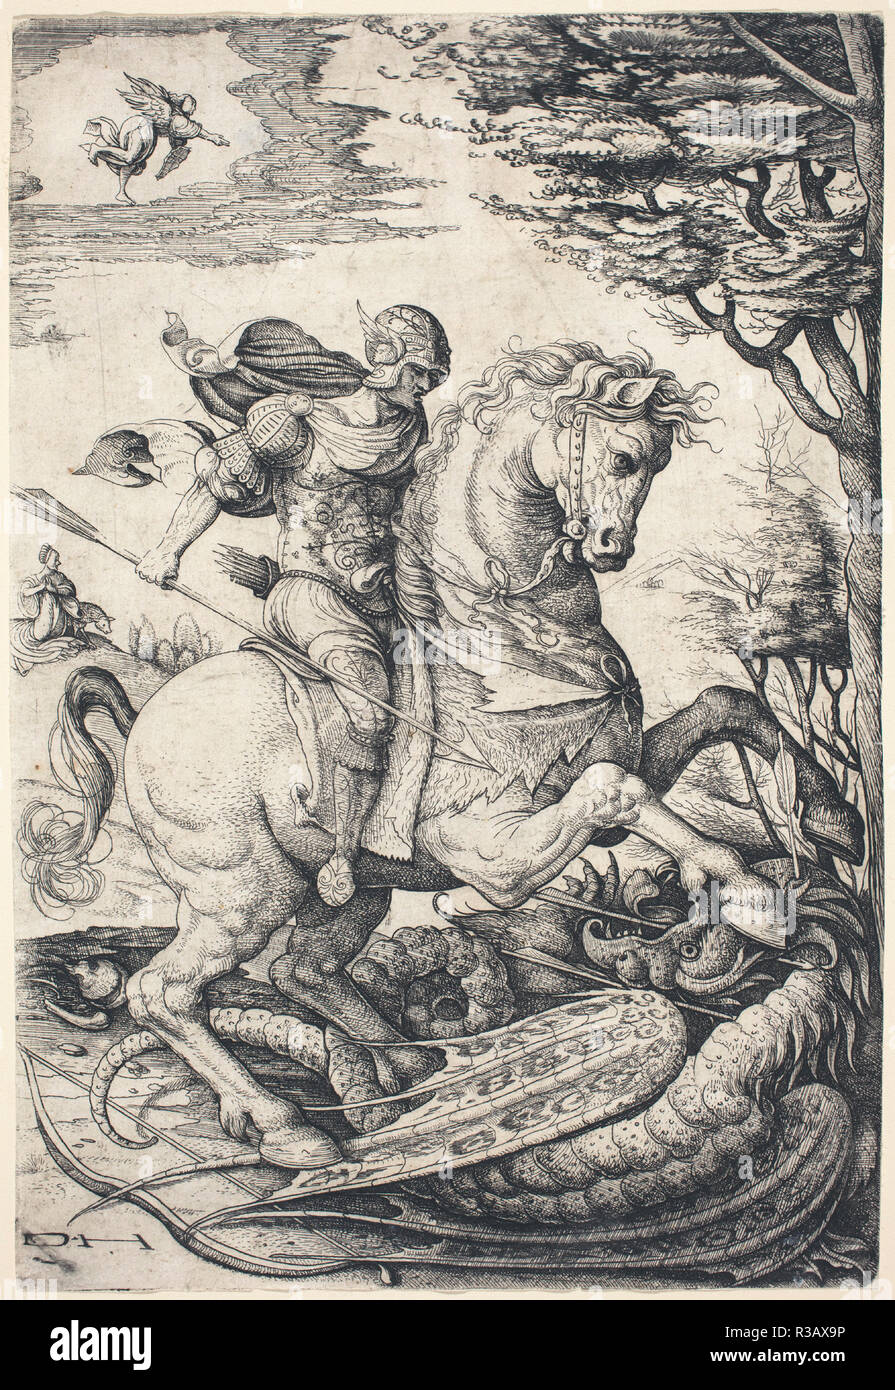 Saint George on Horseback Slaying the Dragon. Dimensions: sheet (trimmed to plate mark): 22.6 x 15.4 cm (8 7/8 x 6 1/16 in.). Medium: etching (iron), plate bitten twice. Museum: National Gallery of Art, Washington DC. Author: DANIEL HOPFER. Stock Photo